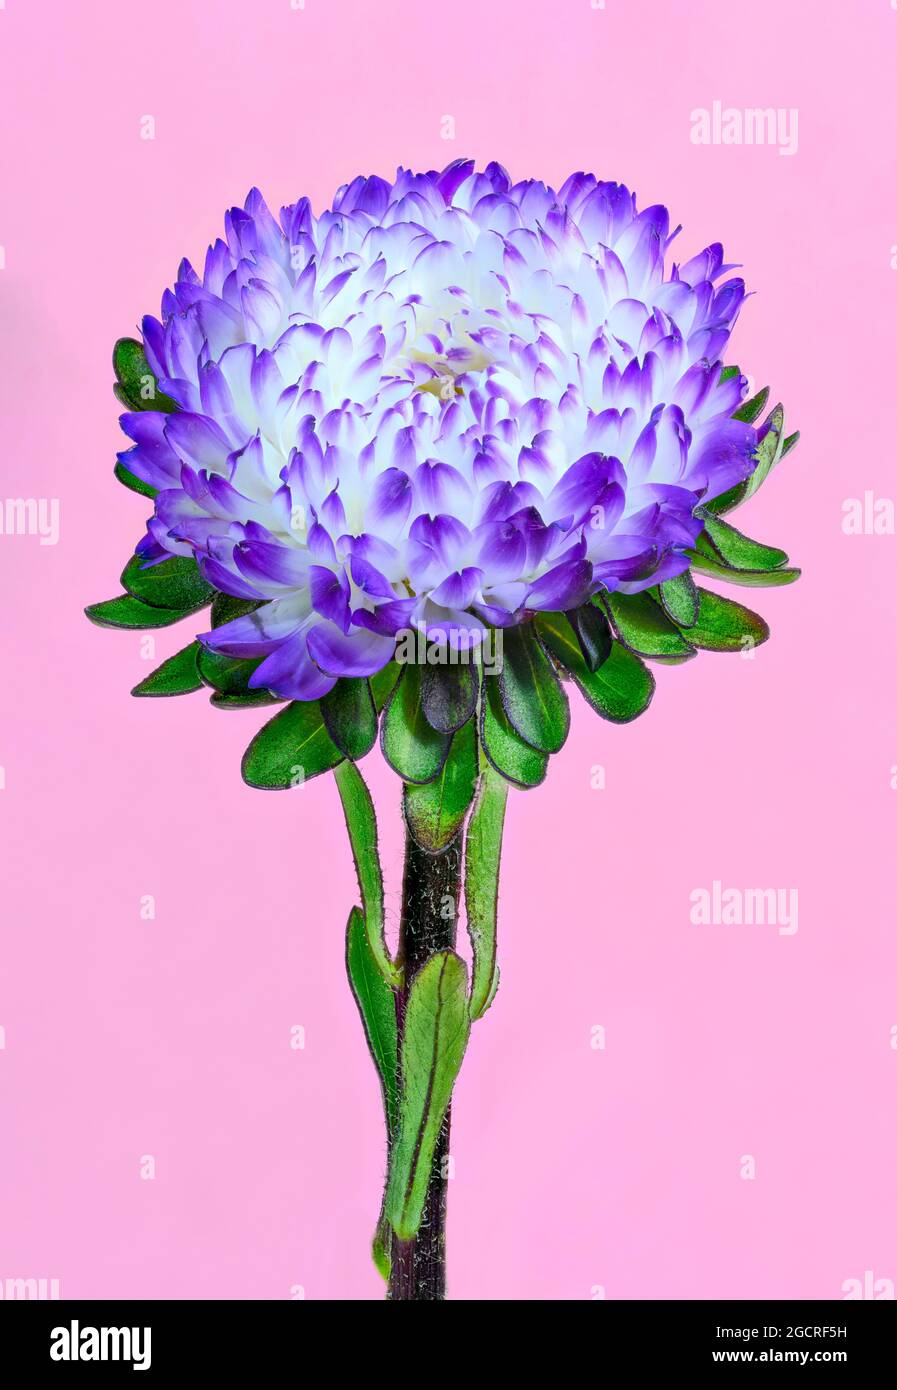 A variety of purple Aster photographed against a plain pink background Stock Photo